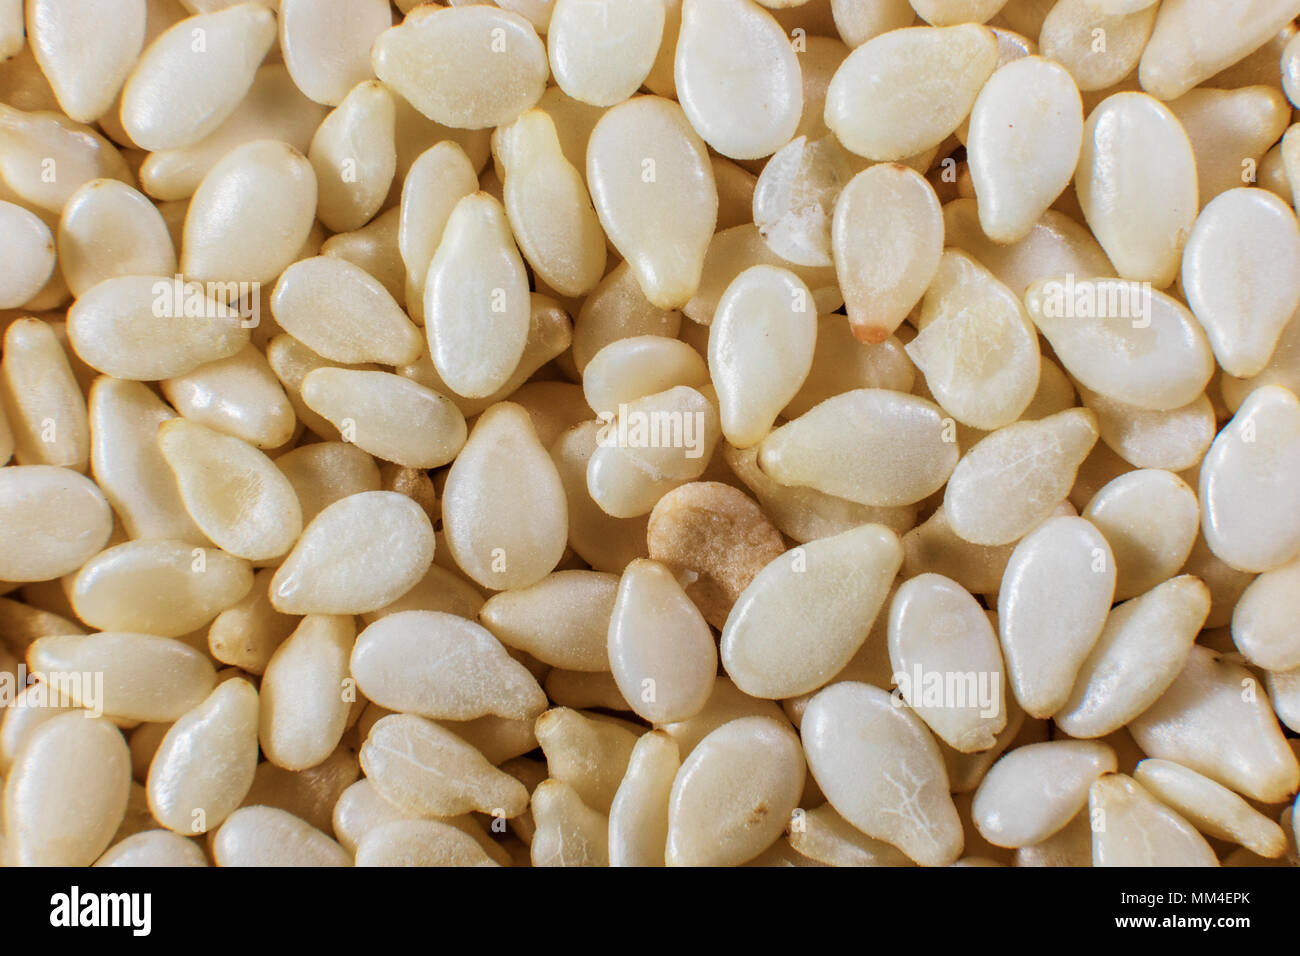 image background of small sesame seeds closeup Stock Photo